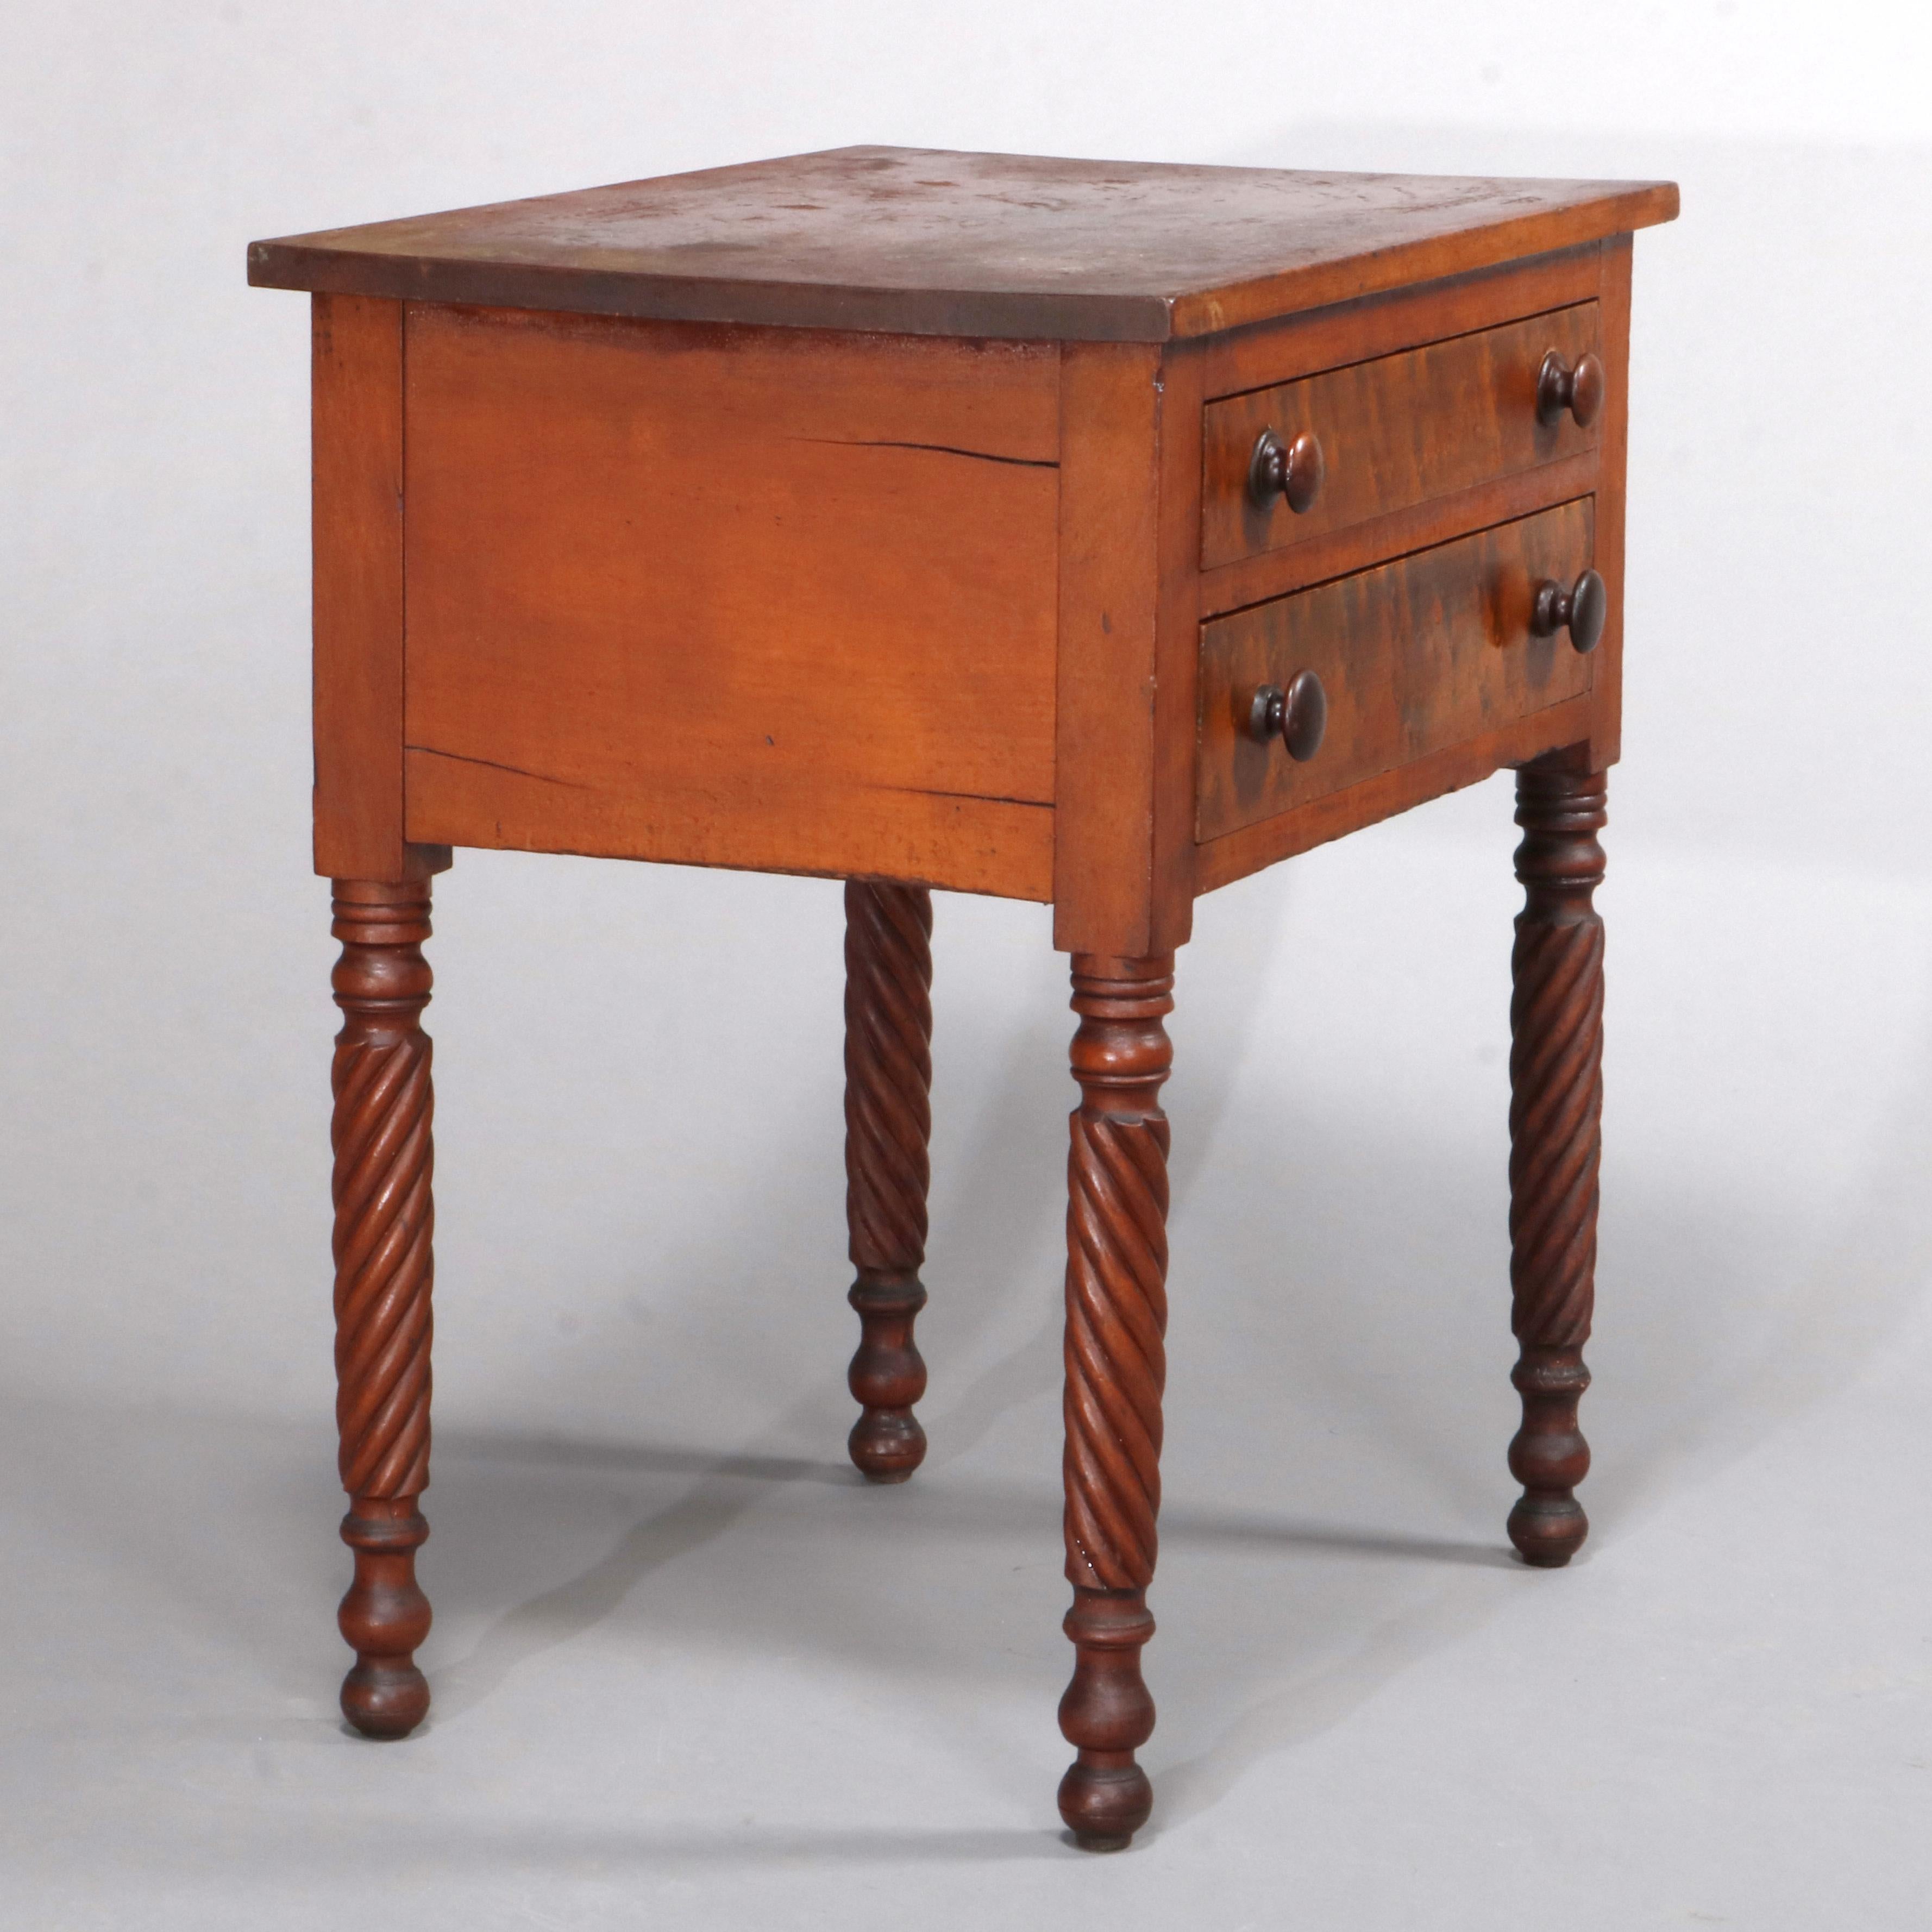 An antique Sheraton side stand offers cherry construction with case having two bird's-eye maple drawers, raised on turned legs, circa 1840

Measures: 28.25